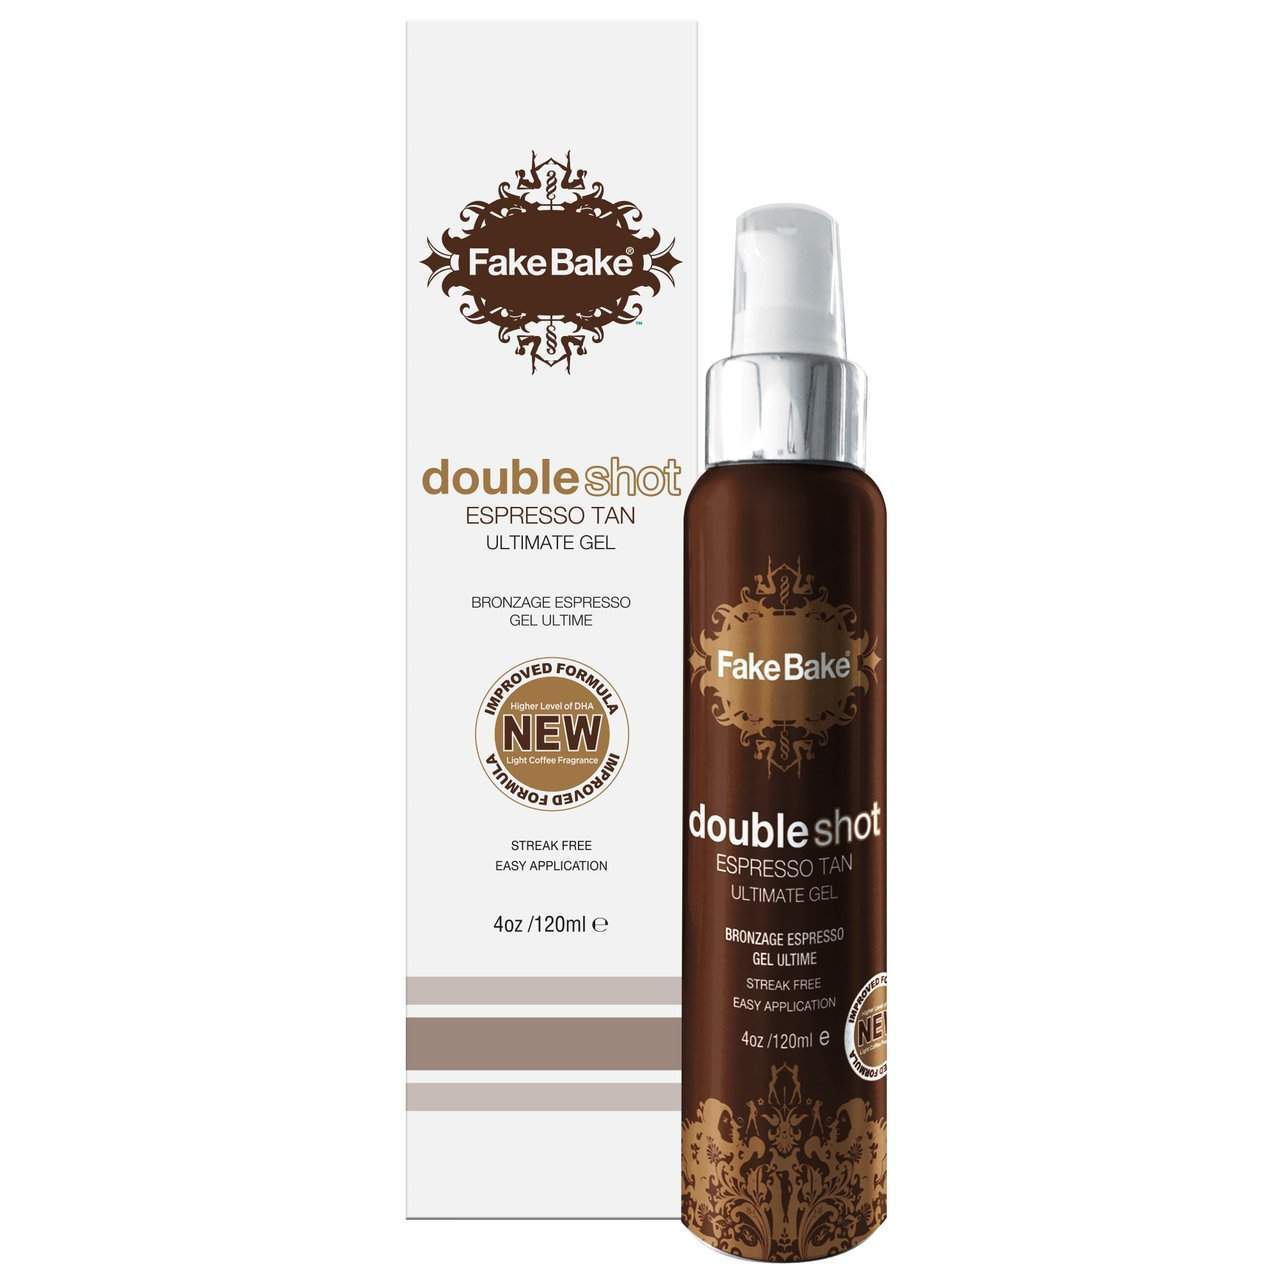 Fake Bake Double Shot Espresso Tan Ultimate Gel-Fake Bake-BB_Self-Tanners,Brand_Fake Bake,Collection_Bath and Body,Collection_Summer,Trendy22